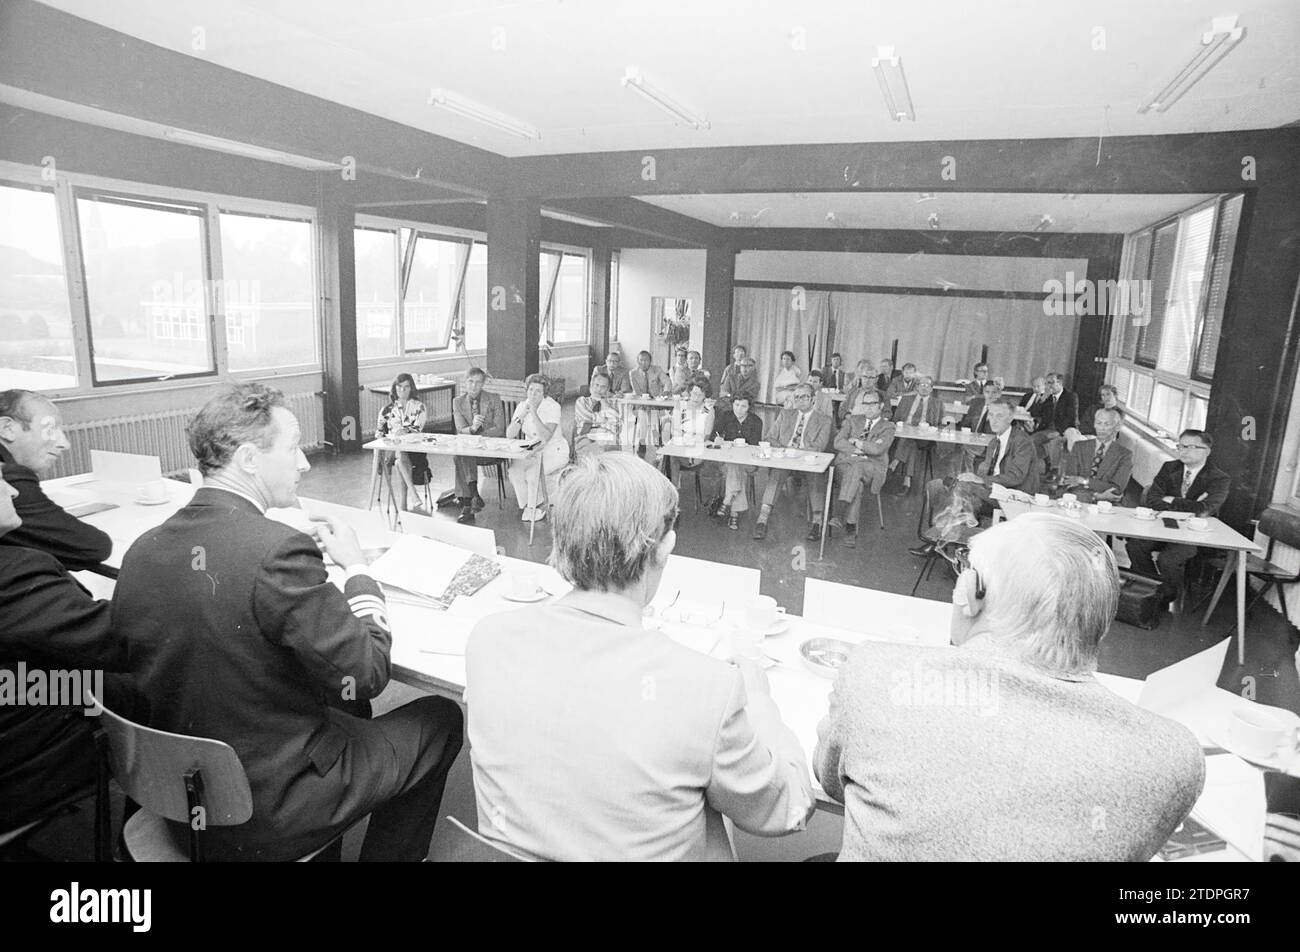 Meeting., Whizgle News from the Past, Tailored for the Future. Explore historical narratives, Dutch The Netherlands agency image with a modern perspective, bridging the gap between yesterday's events and tomorrow's insights. A timeless journey shaping the stories that shape our future Stock Photo